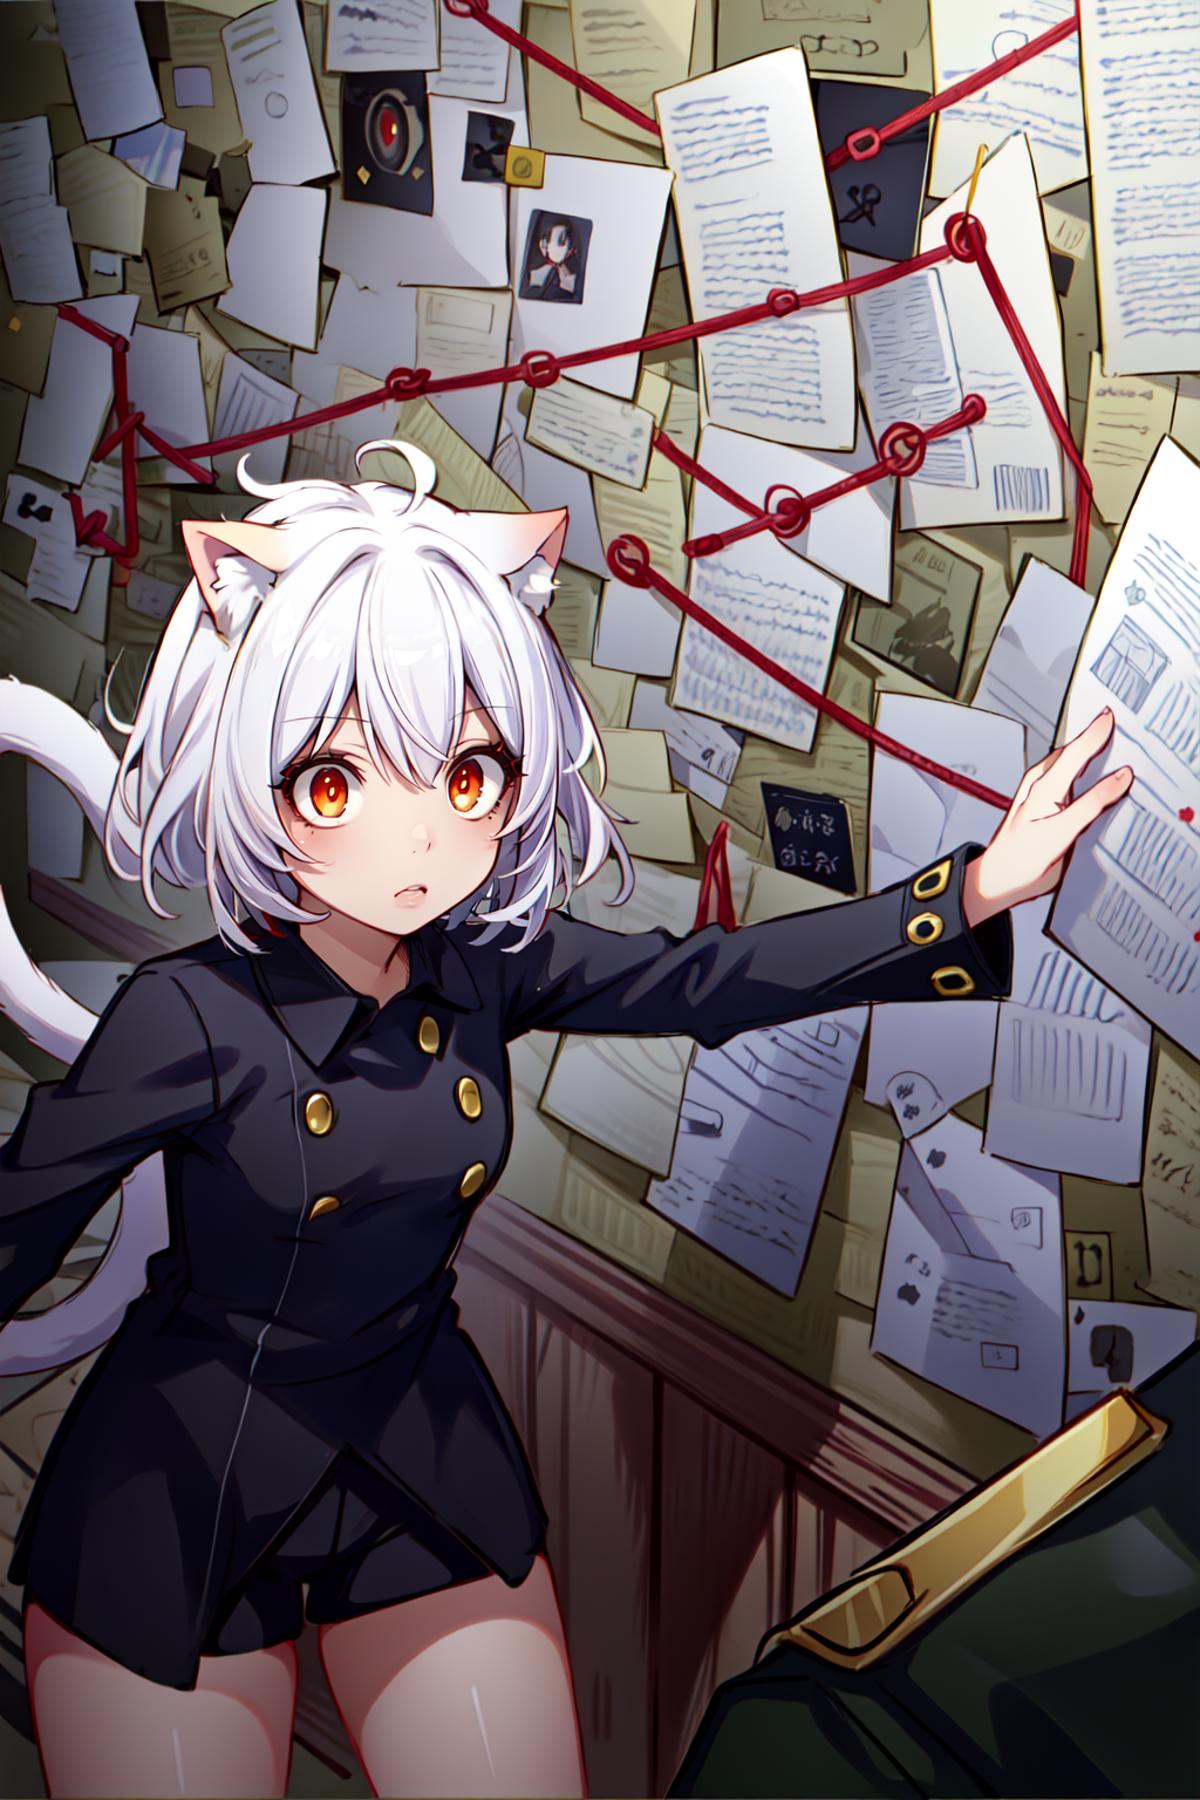 A young girl with white hair and a black jacket stands in front of a wall covered in papers, looking at a piece of paper. She appears to be engaged in a task or examining the wall of information.